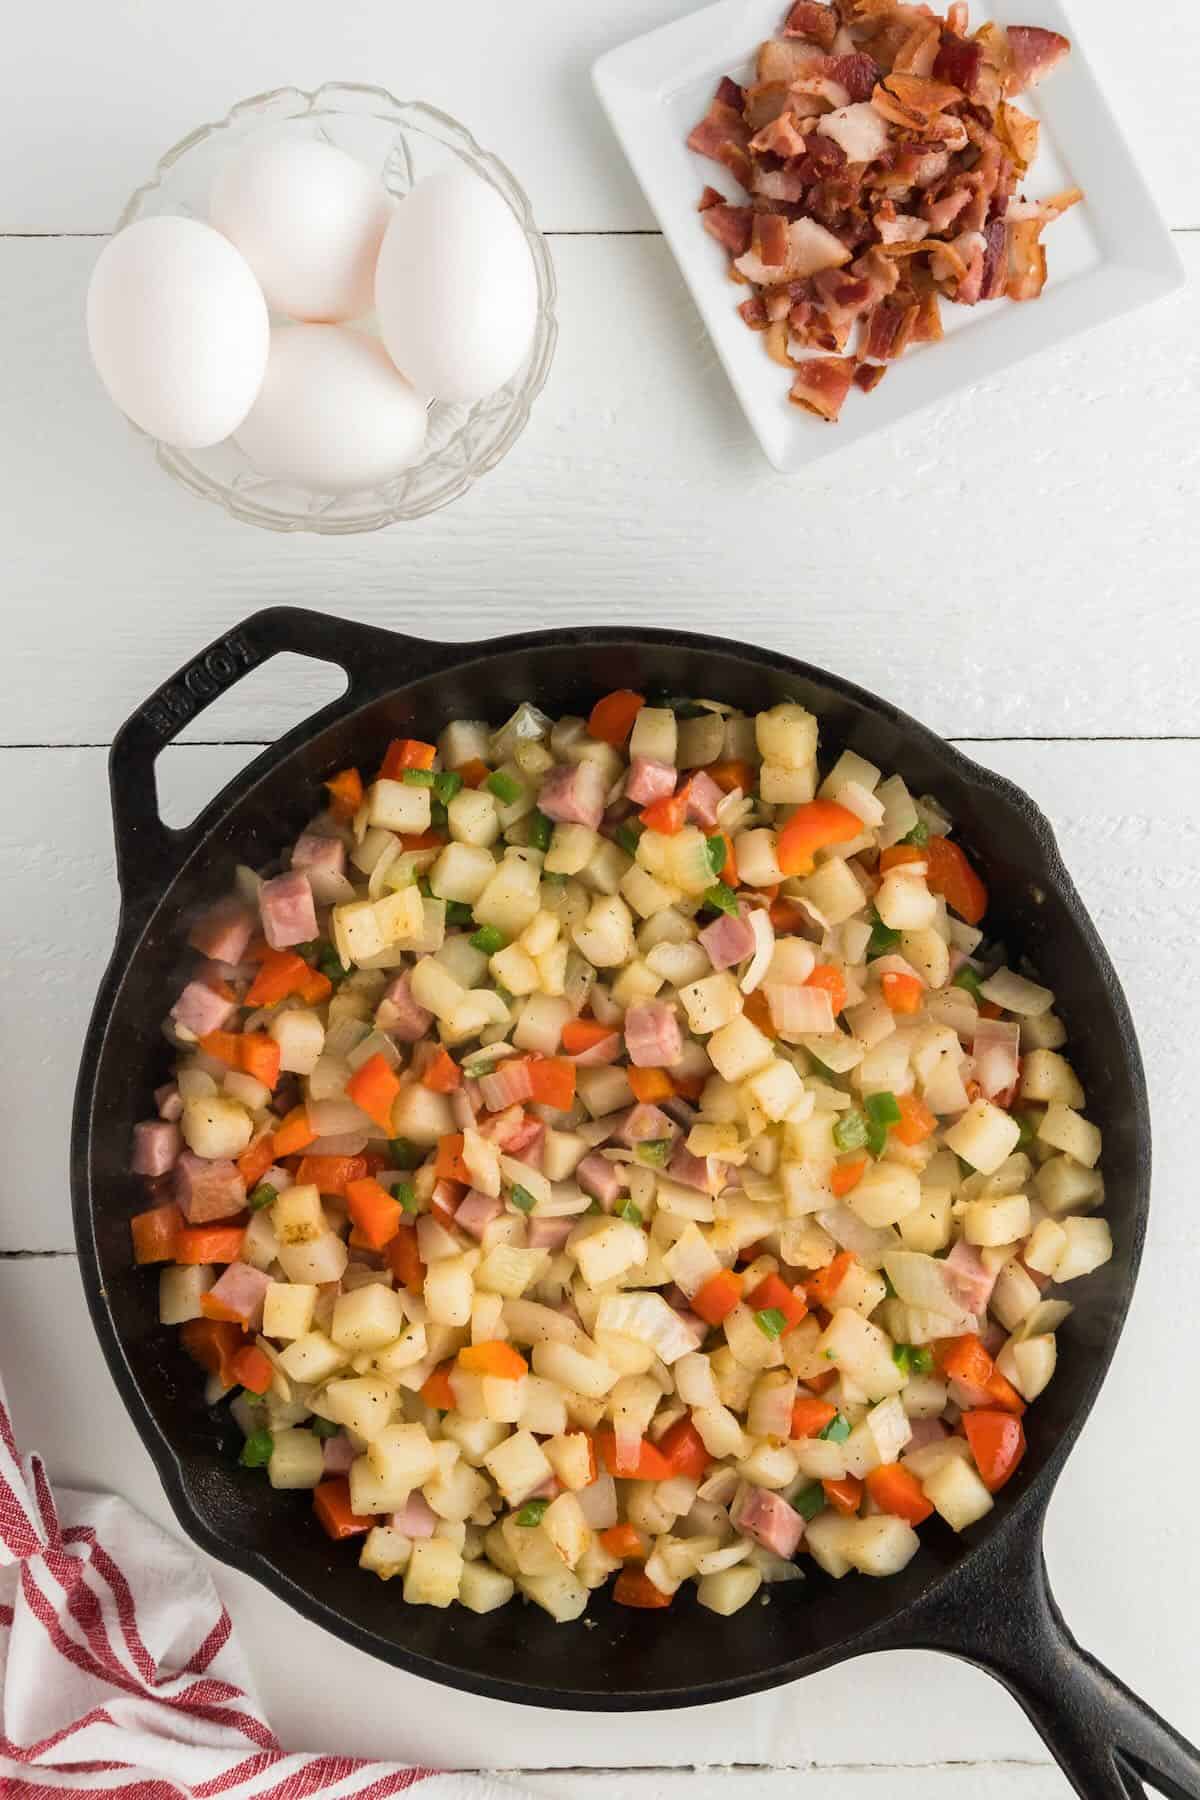 Cubed potatoes and other veggies cooking in a cast iron skillet.